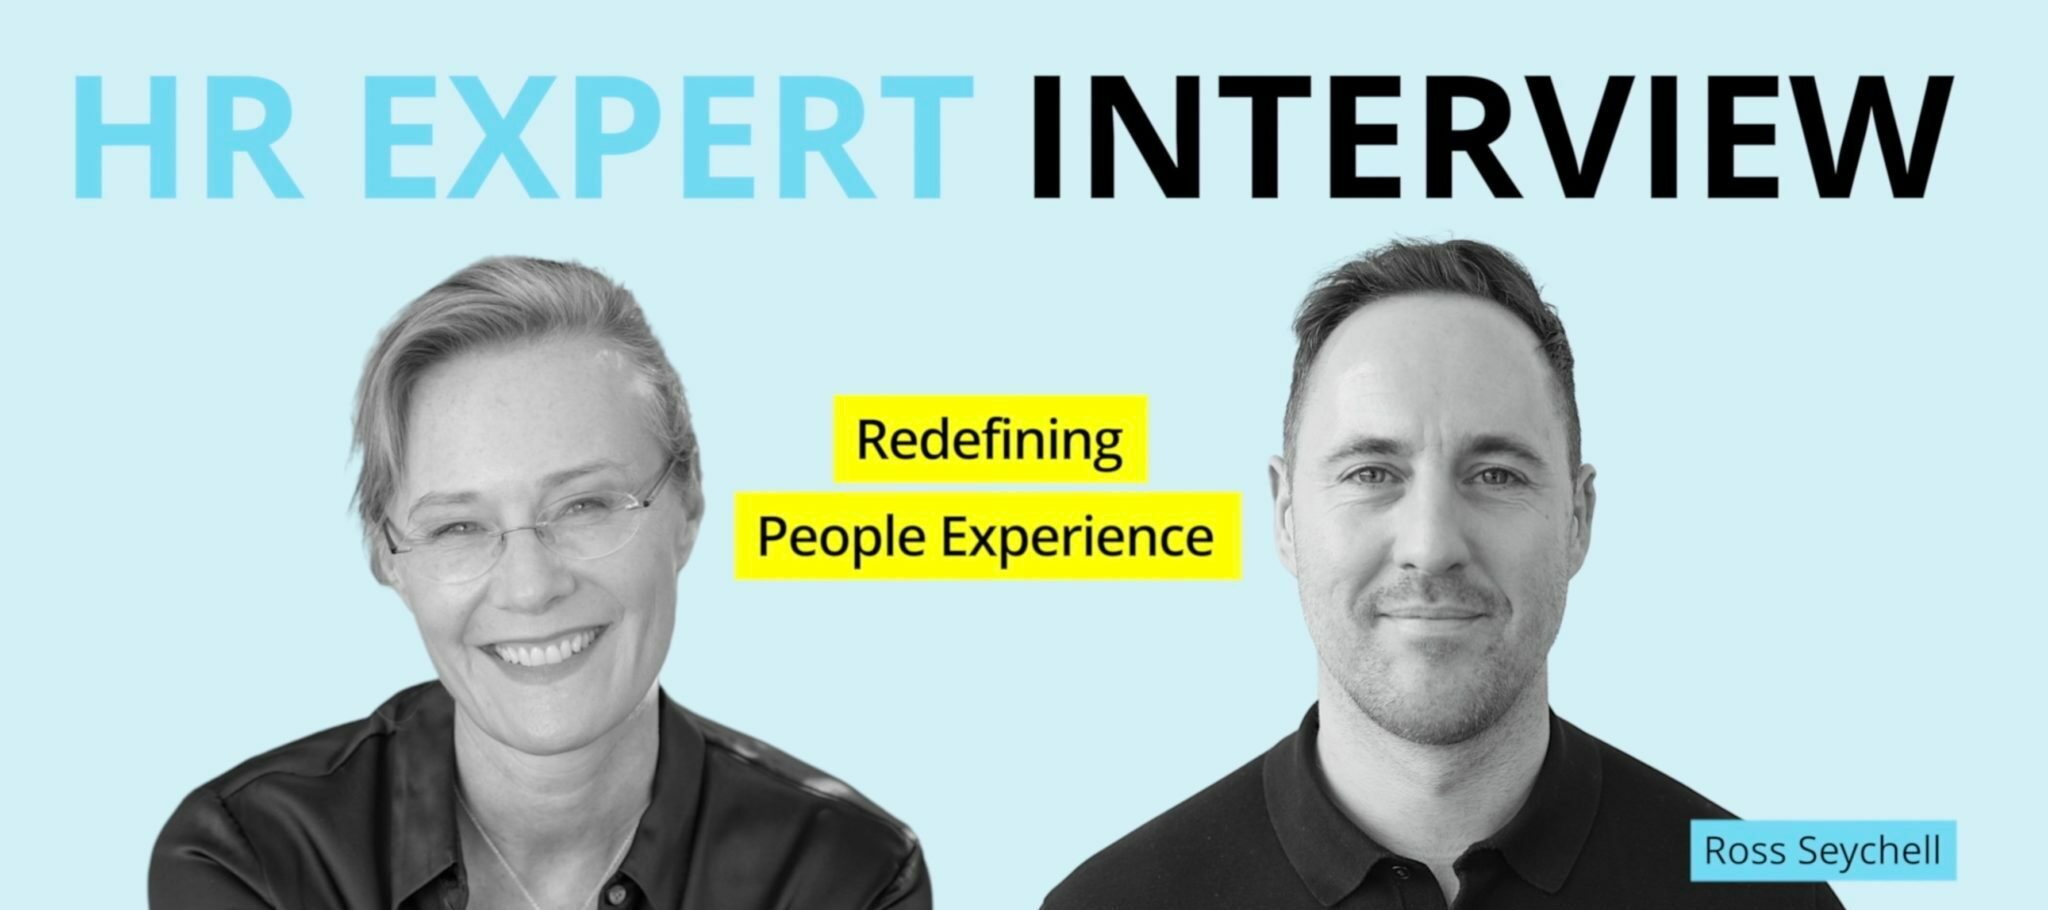 HR Expert Interview: Redefining People Experiences with Ross Seychell